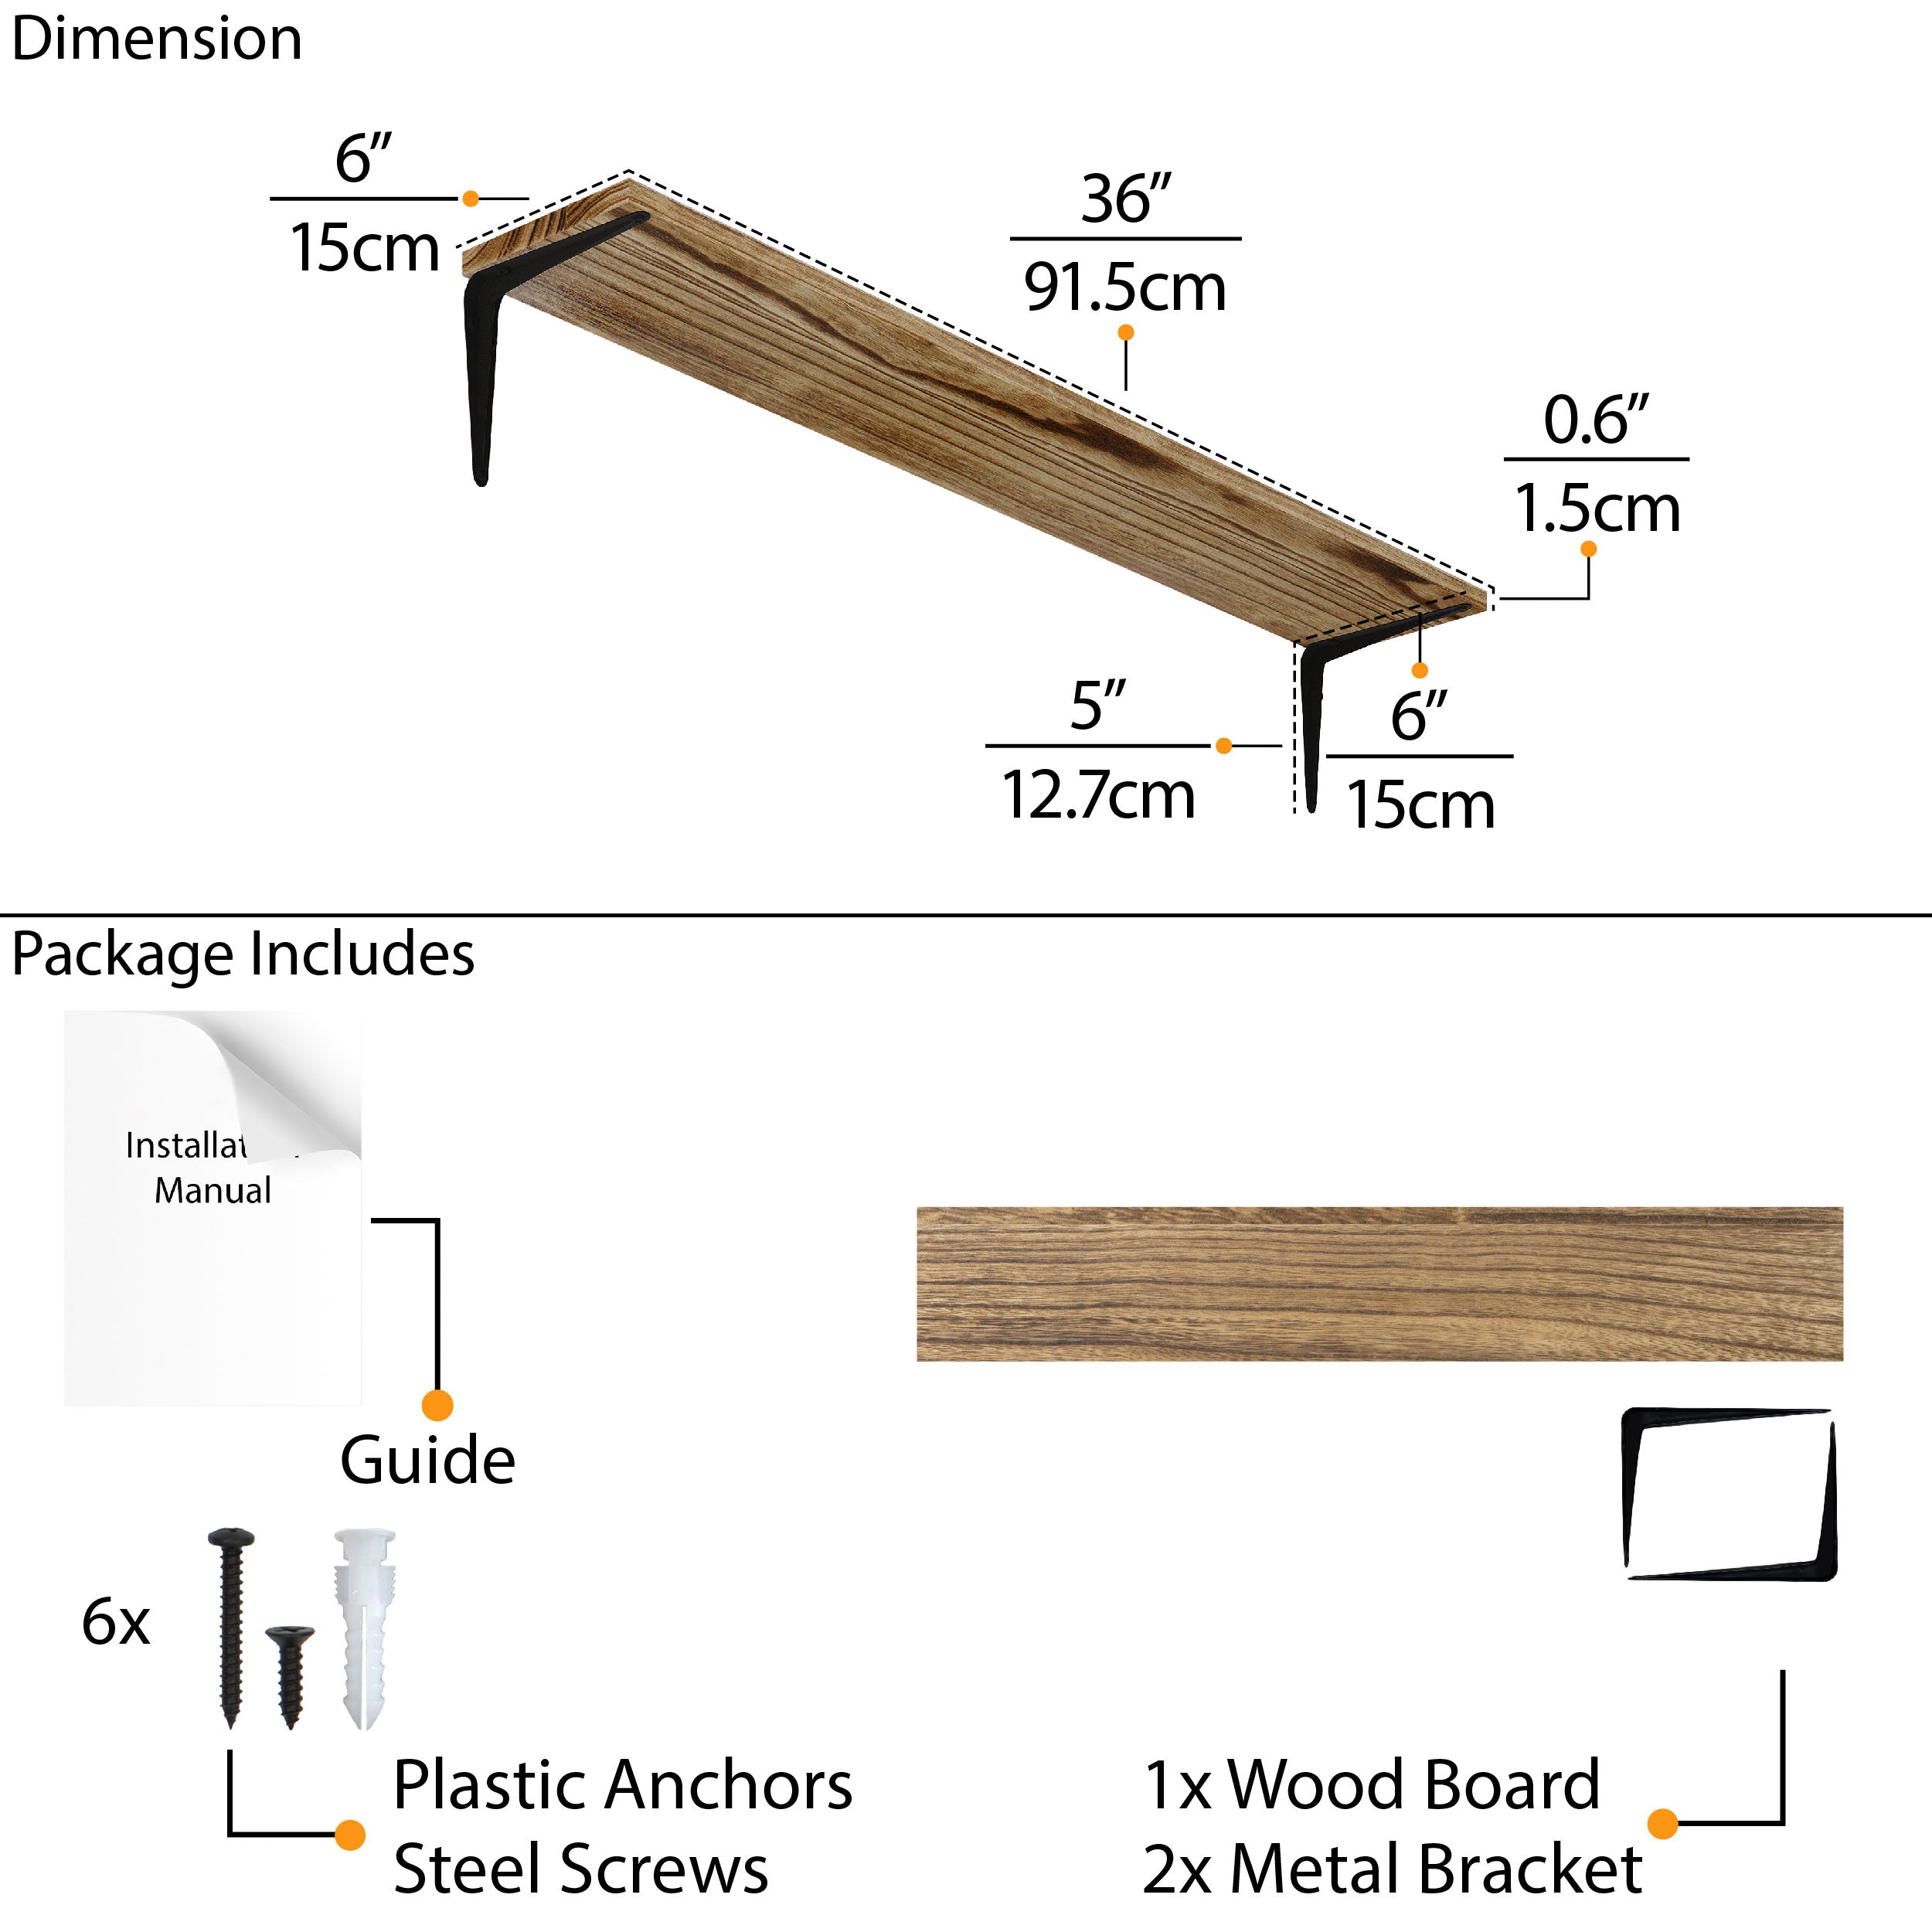 Diagram showing the dimensions and components of a  36'' heavy duty shelf burnt with metal brackets and installation kit.